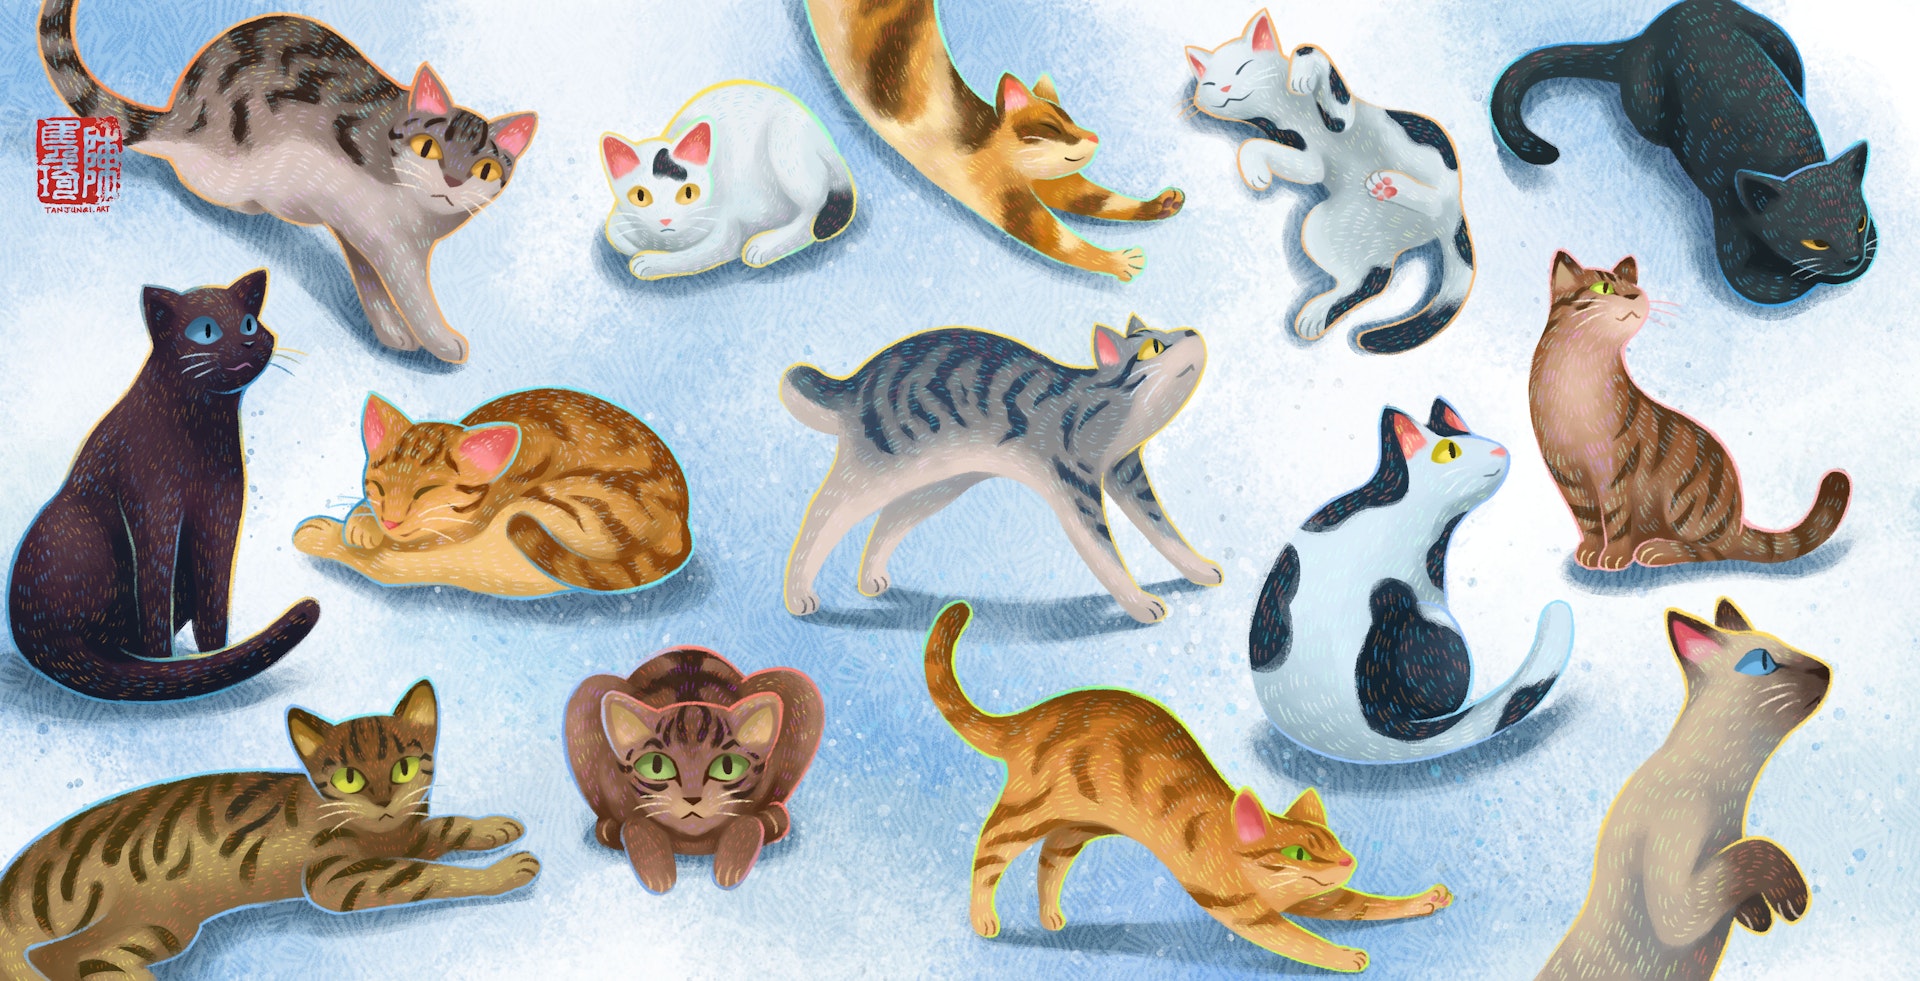 Illustration of various cats in different postures.